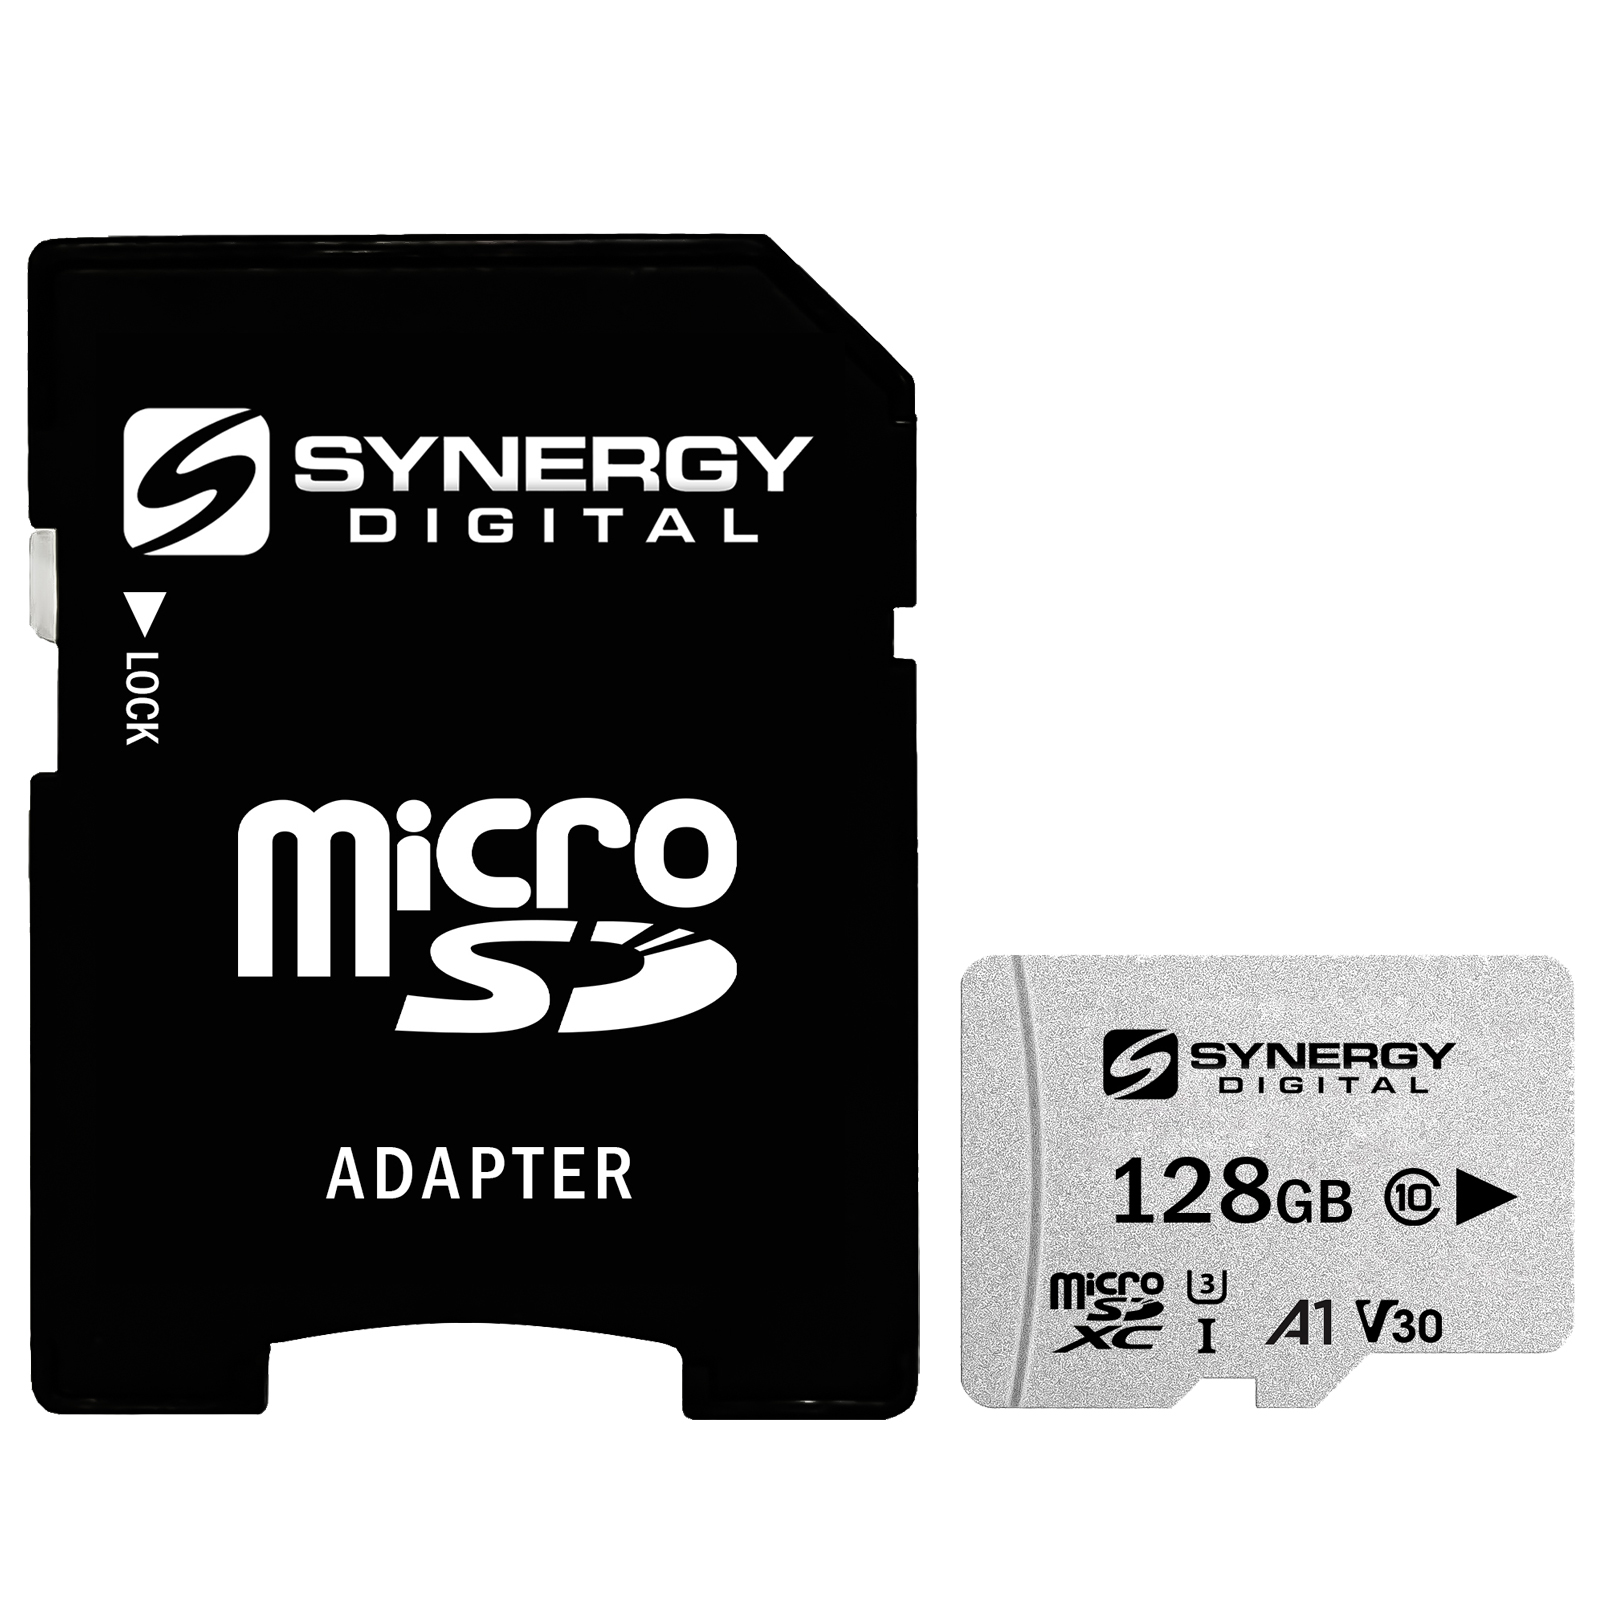 Memory Cards for LGTablet